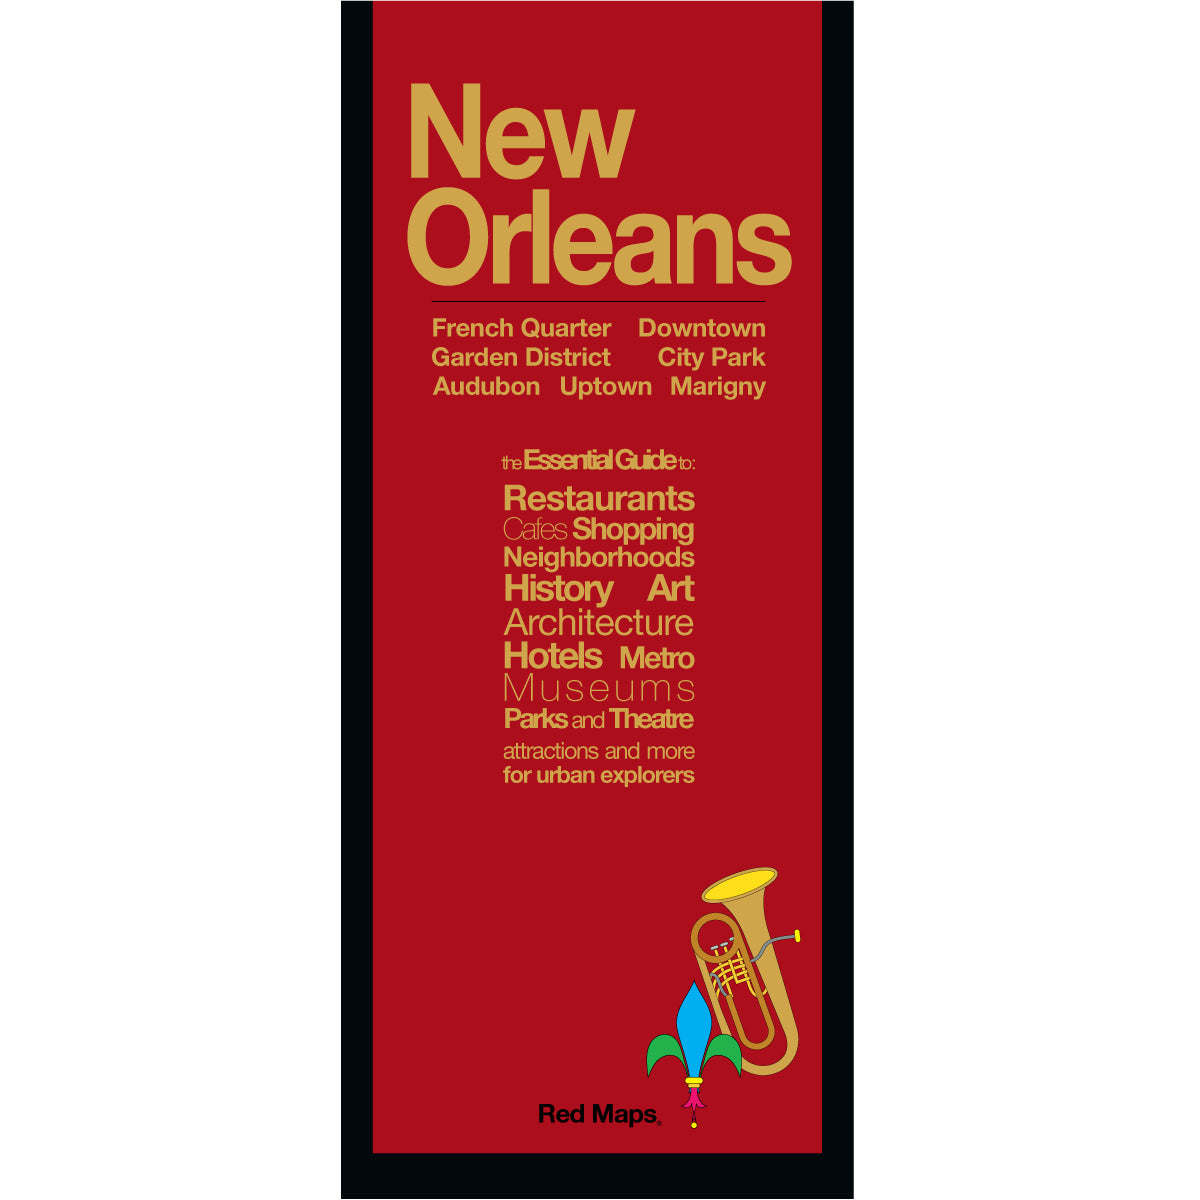 New Orleans city foldout map with a red colored cover.